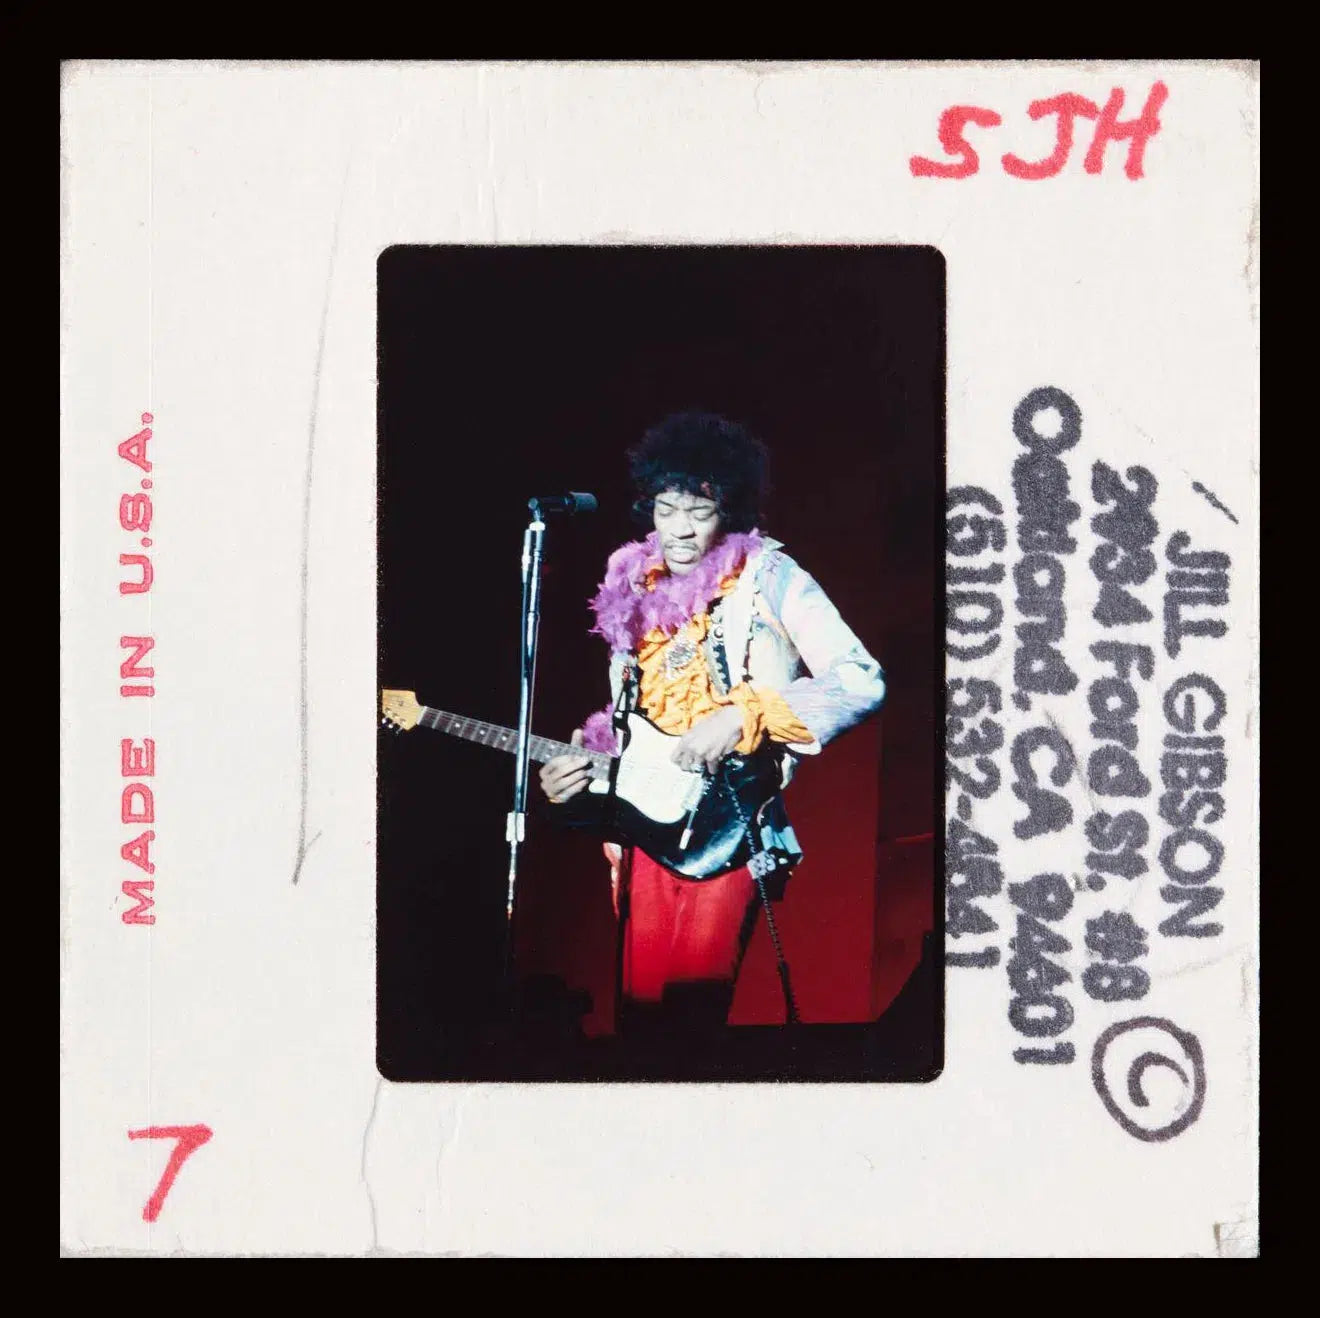 Jimi Hendrix - Slide 2, from The Wild Ones collection-PurePhoto